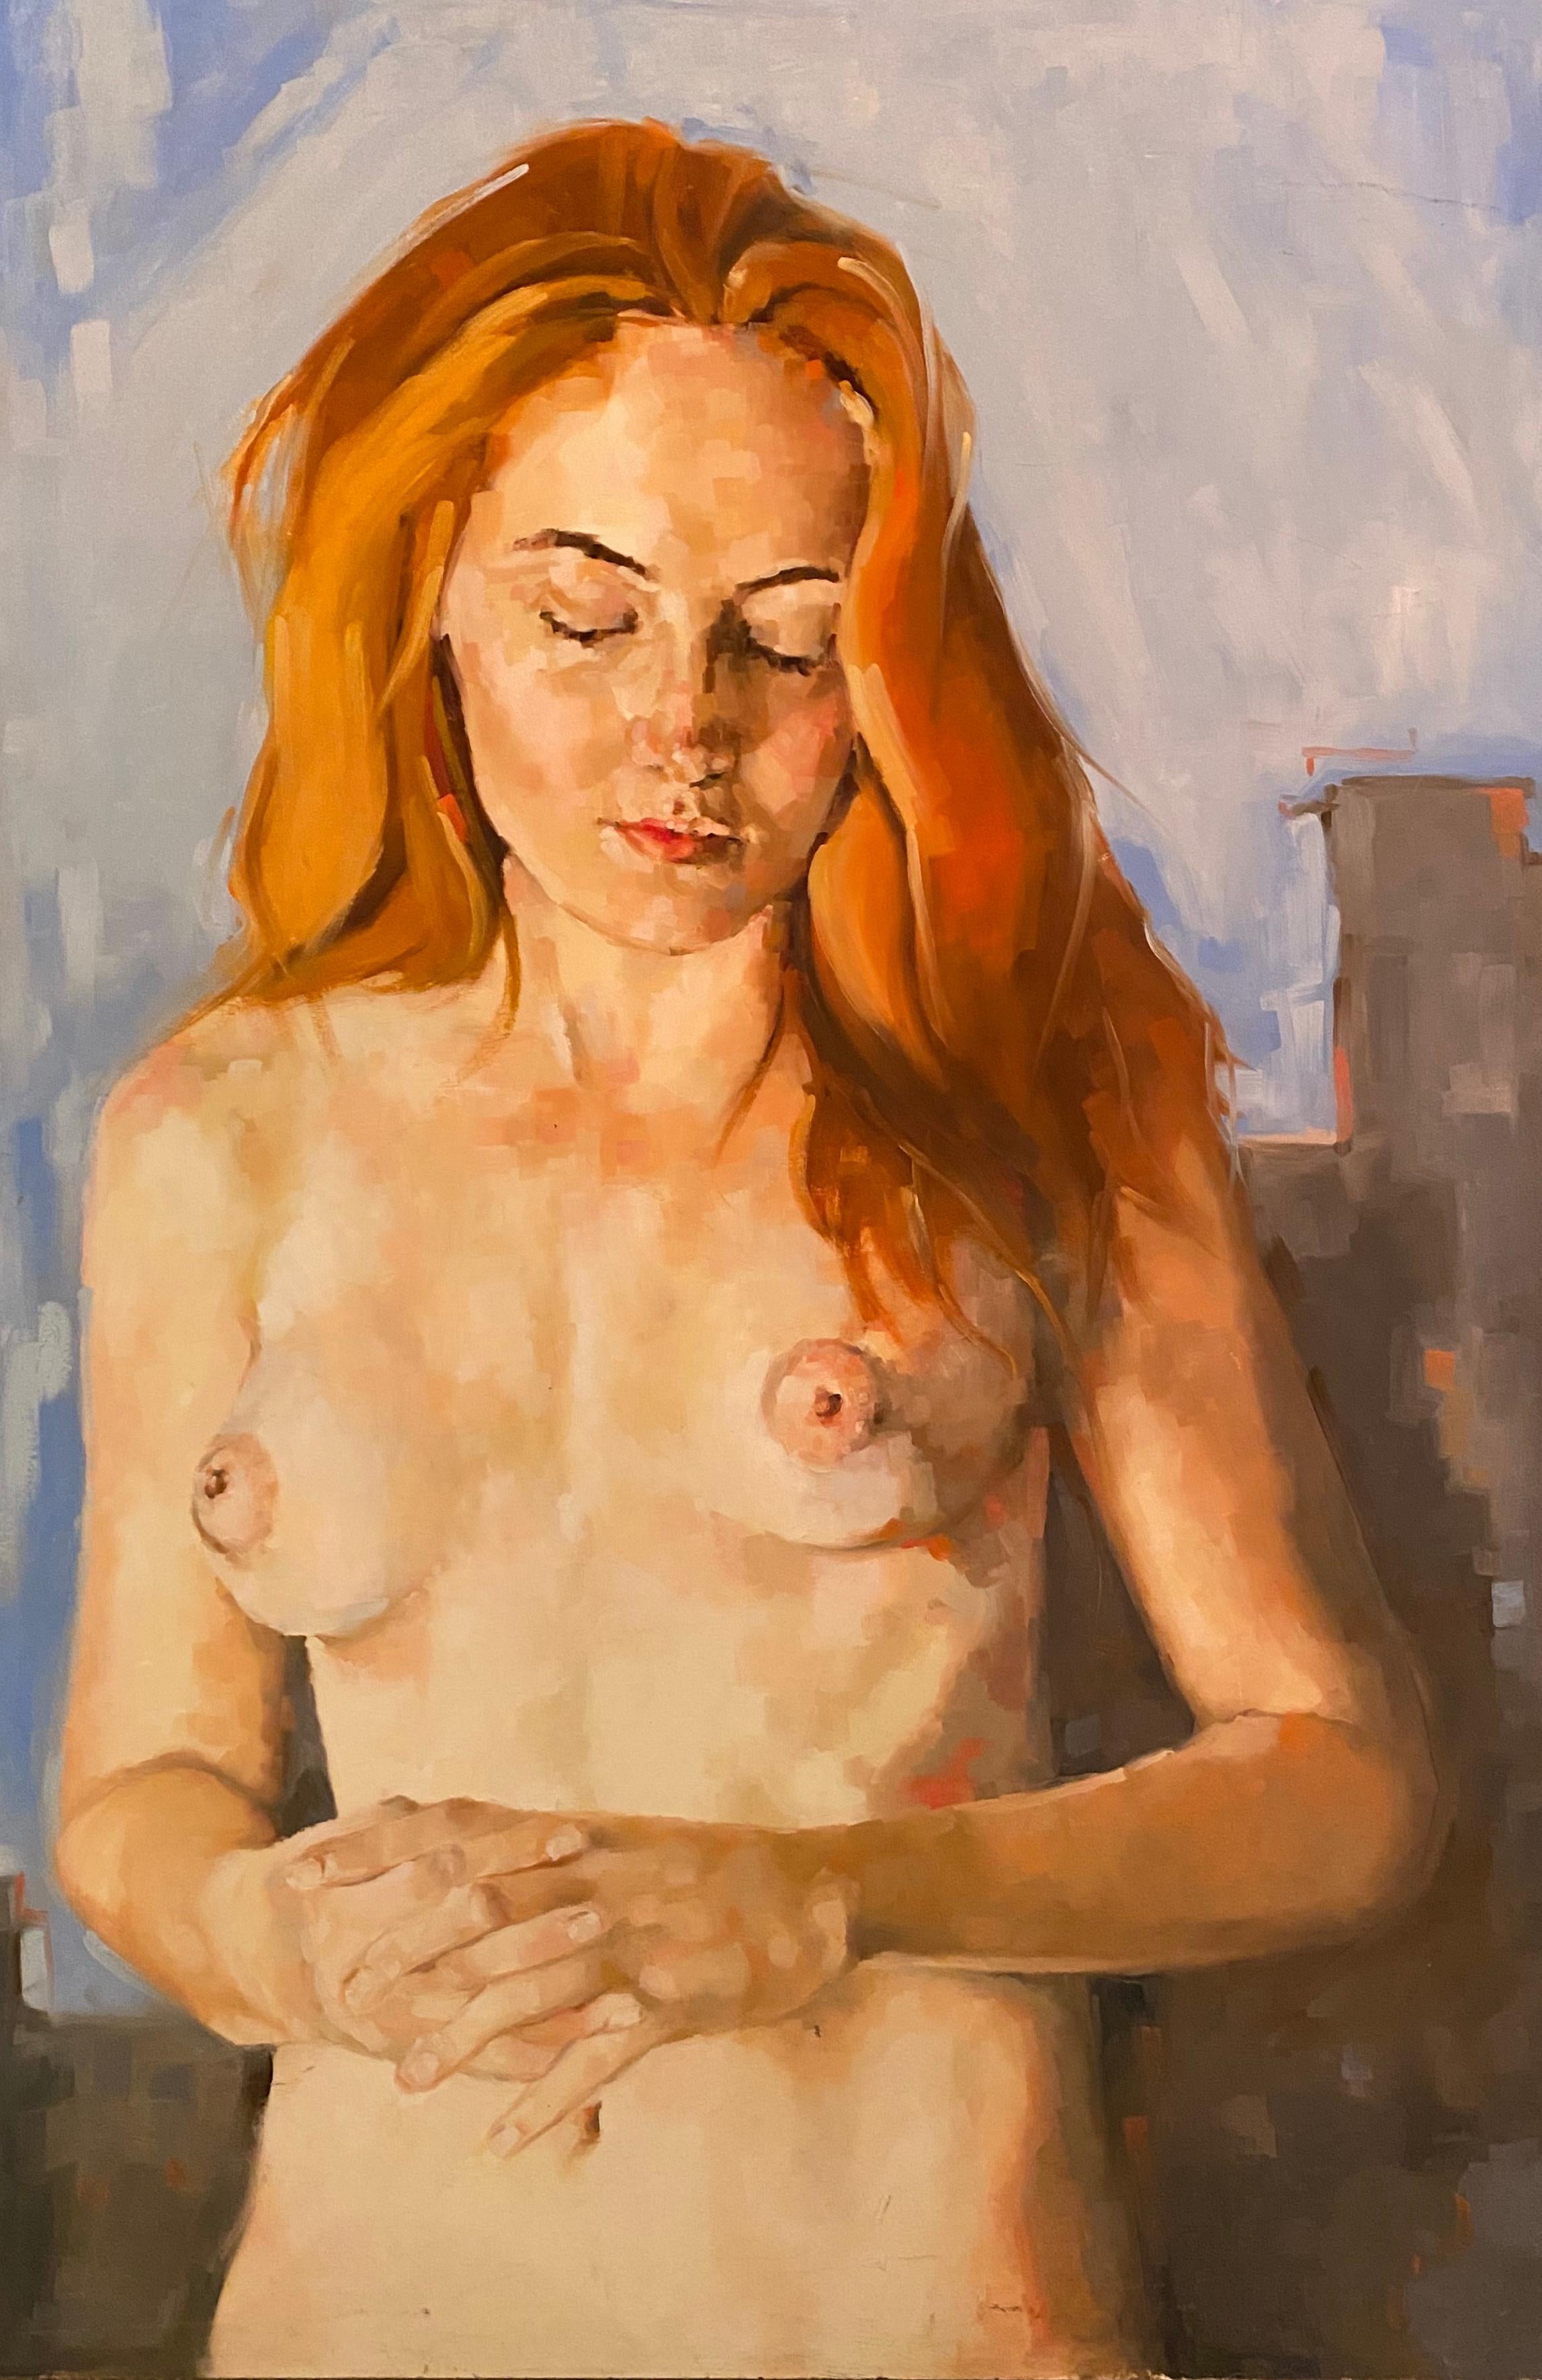 ‘Young Woman With Red Hair’ Figurative Nude  Female Model Oil on Board by Shana 